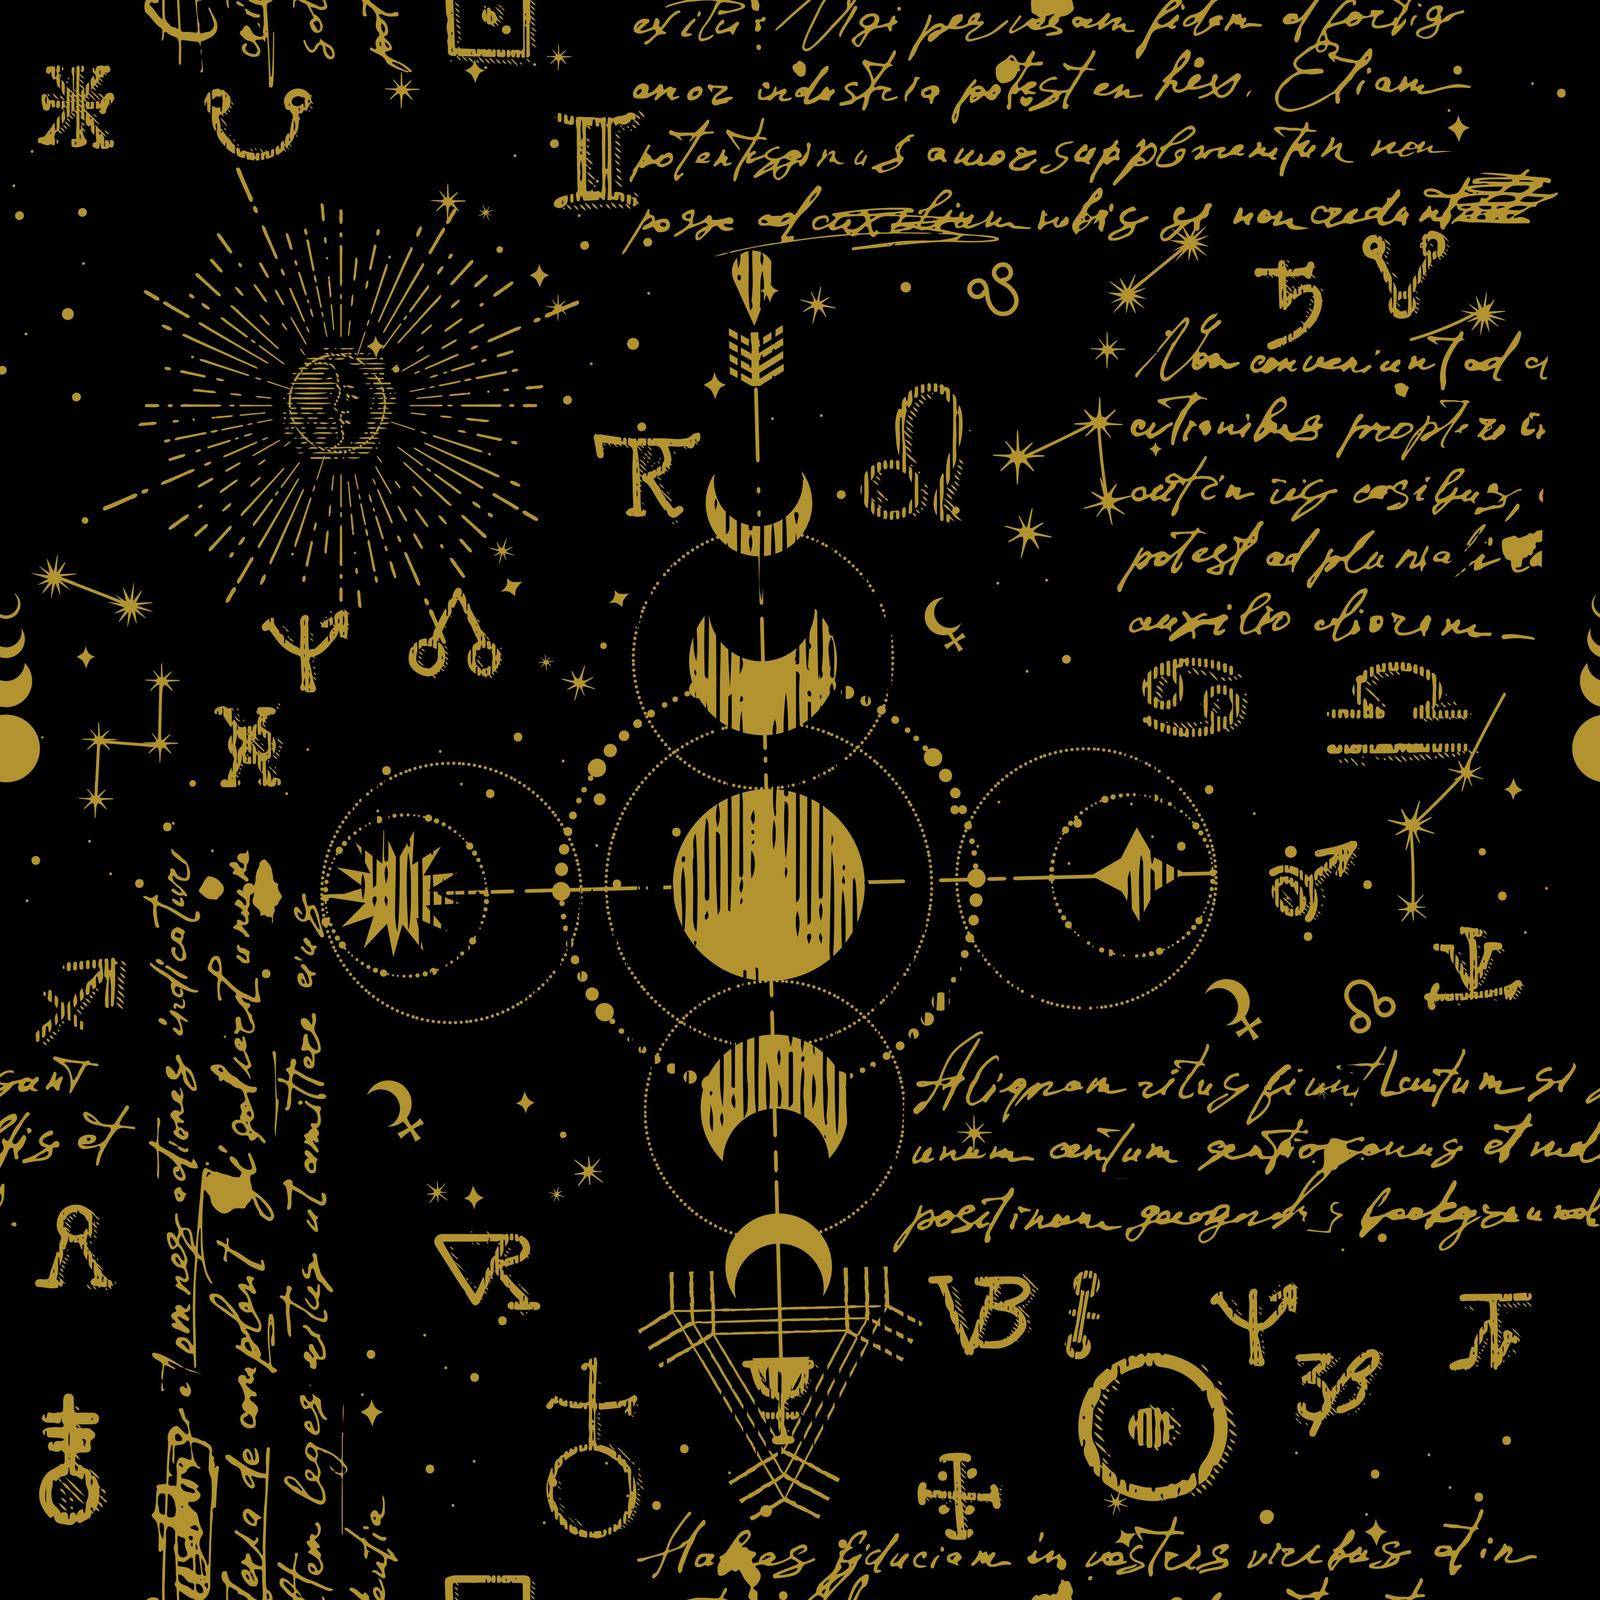 Seamless esoteric pattern. Astrological, magical and esoteric symbols. Background from a manuscript with occult sketches and sloppy handwritten text in the style of a sketch